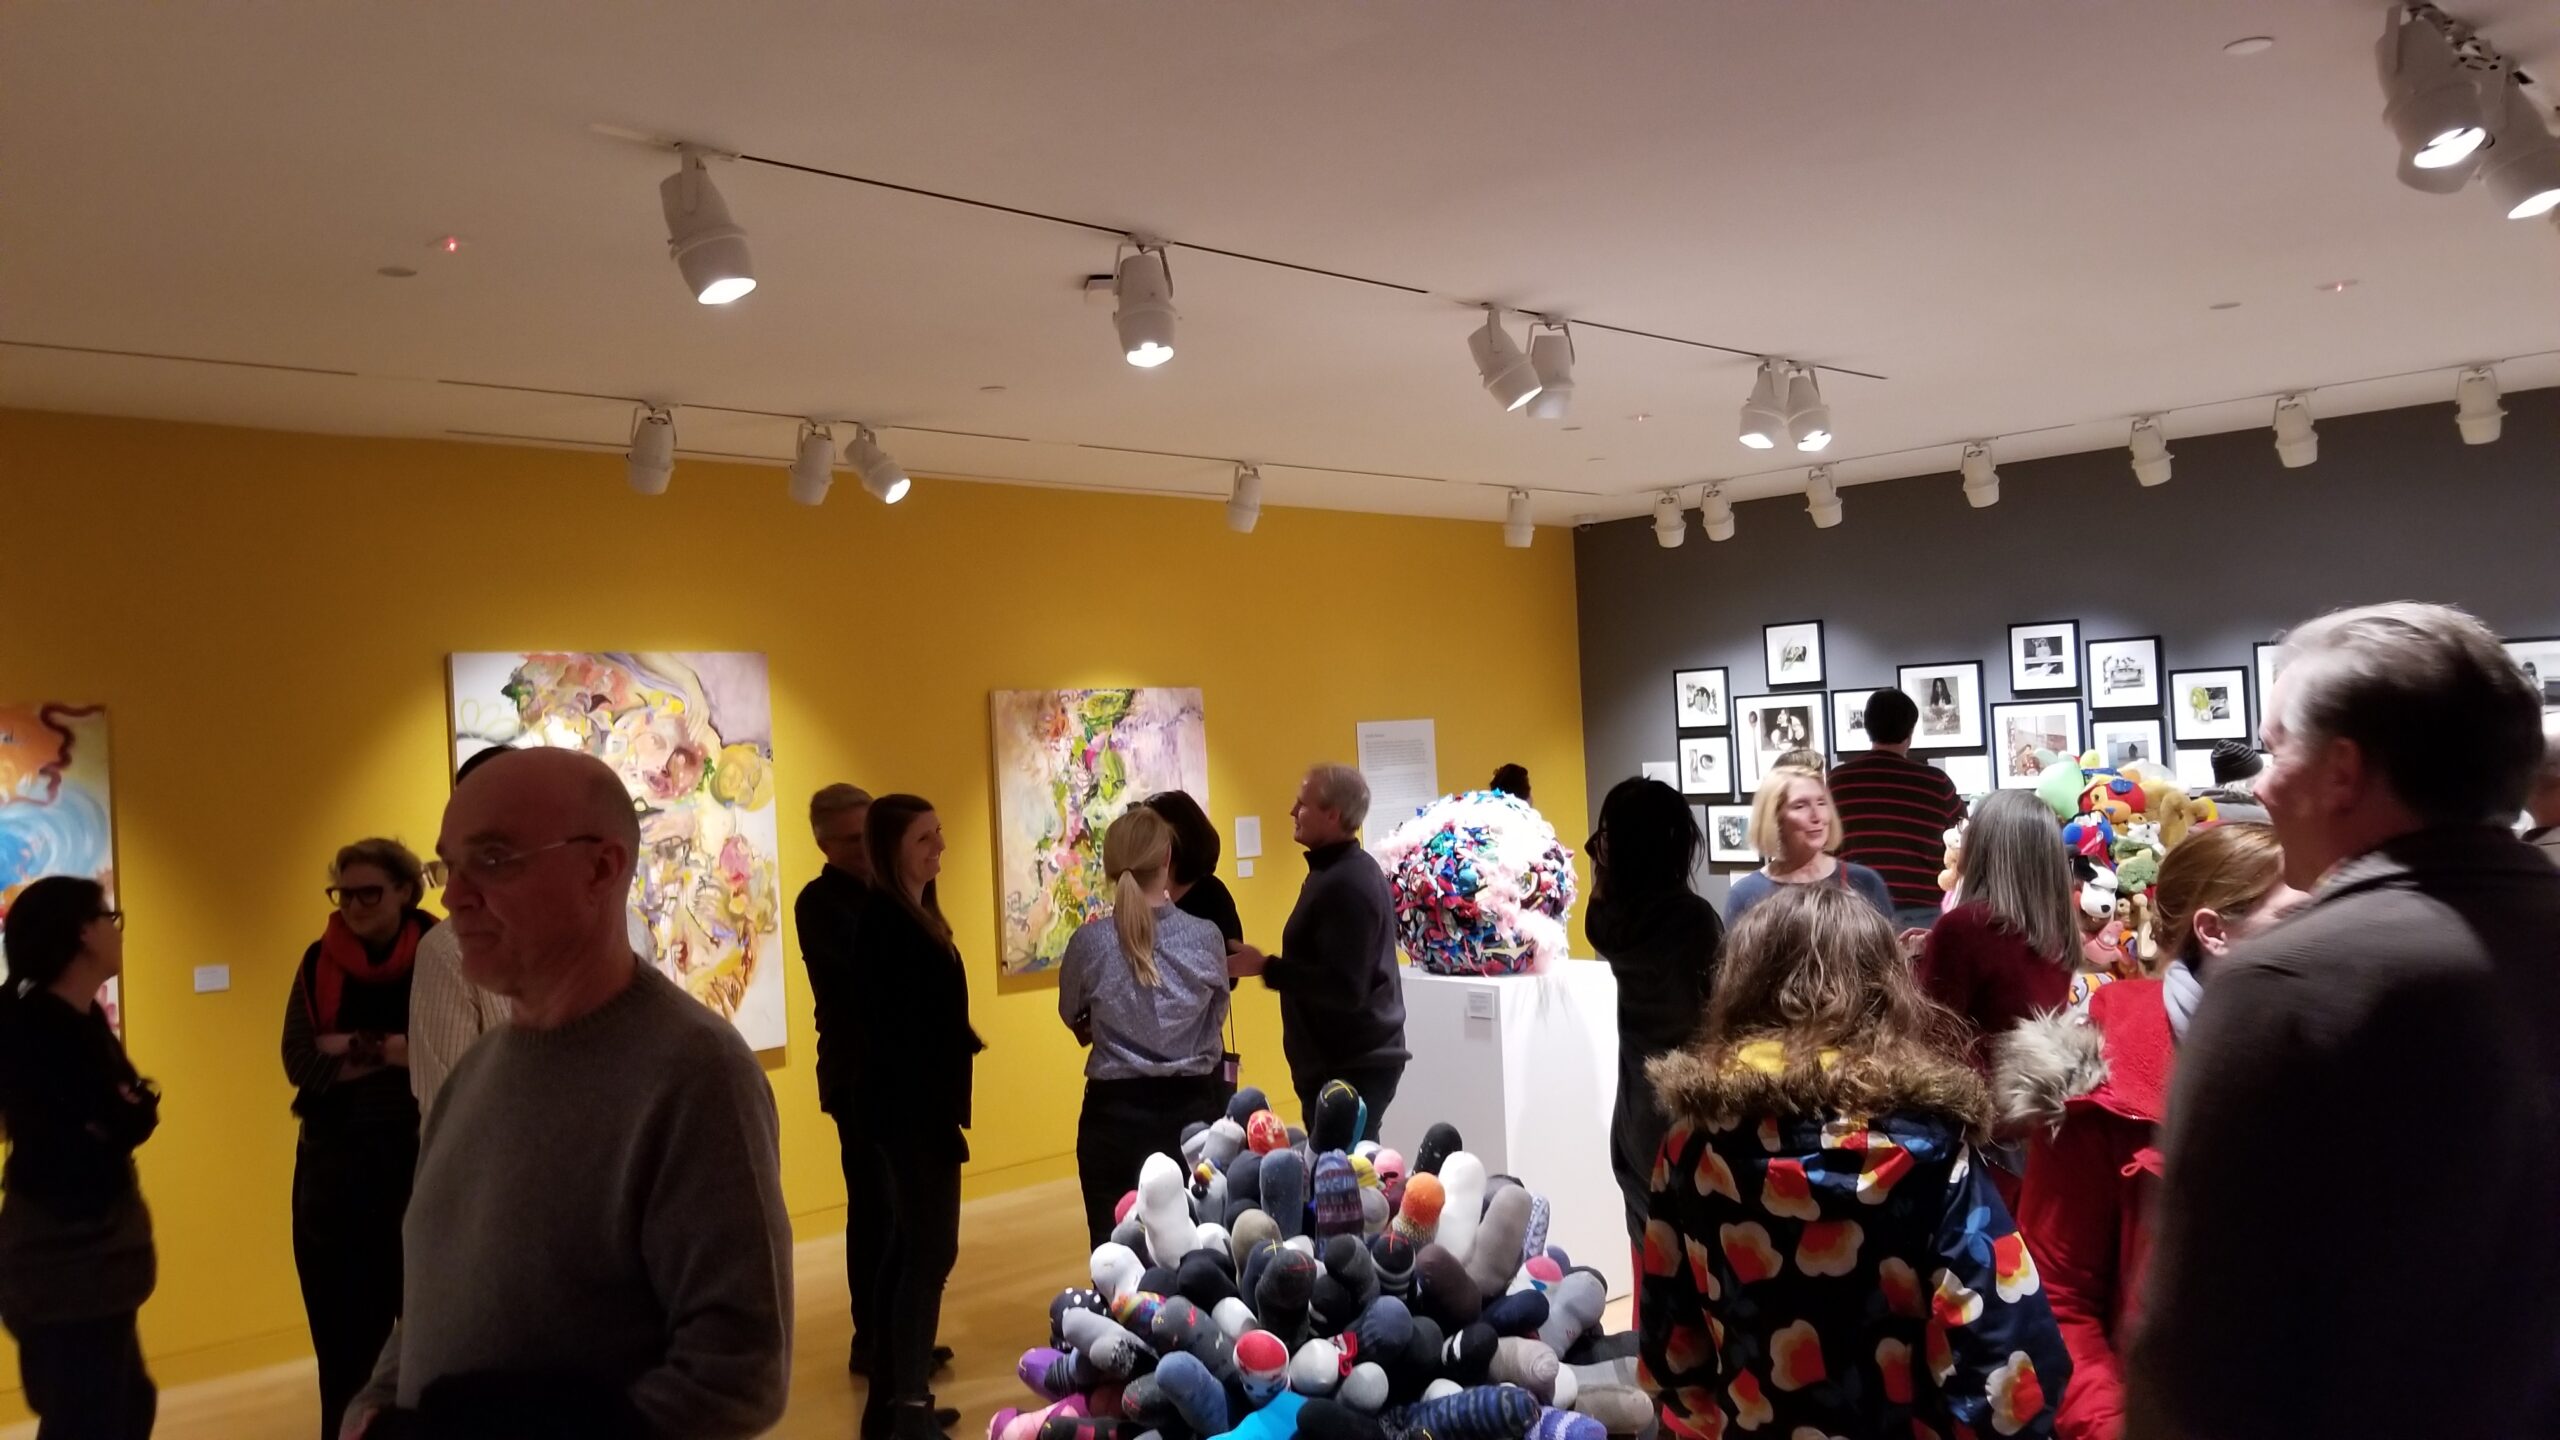 Photograph of a gallery room with yellow and grey walls. There are many people standing about talking and looking at the artwork.